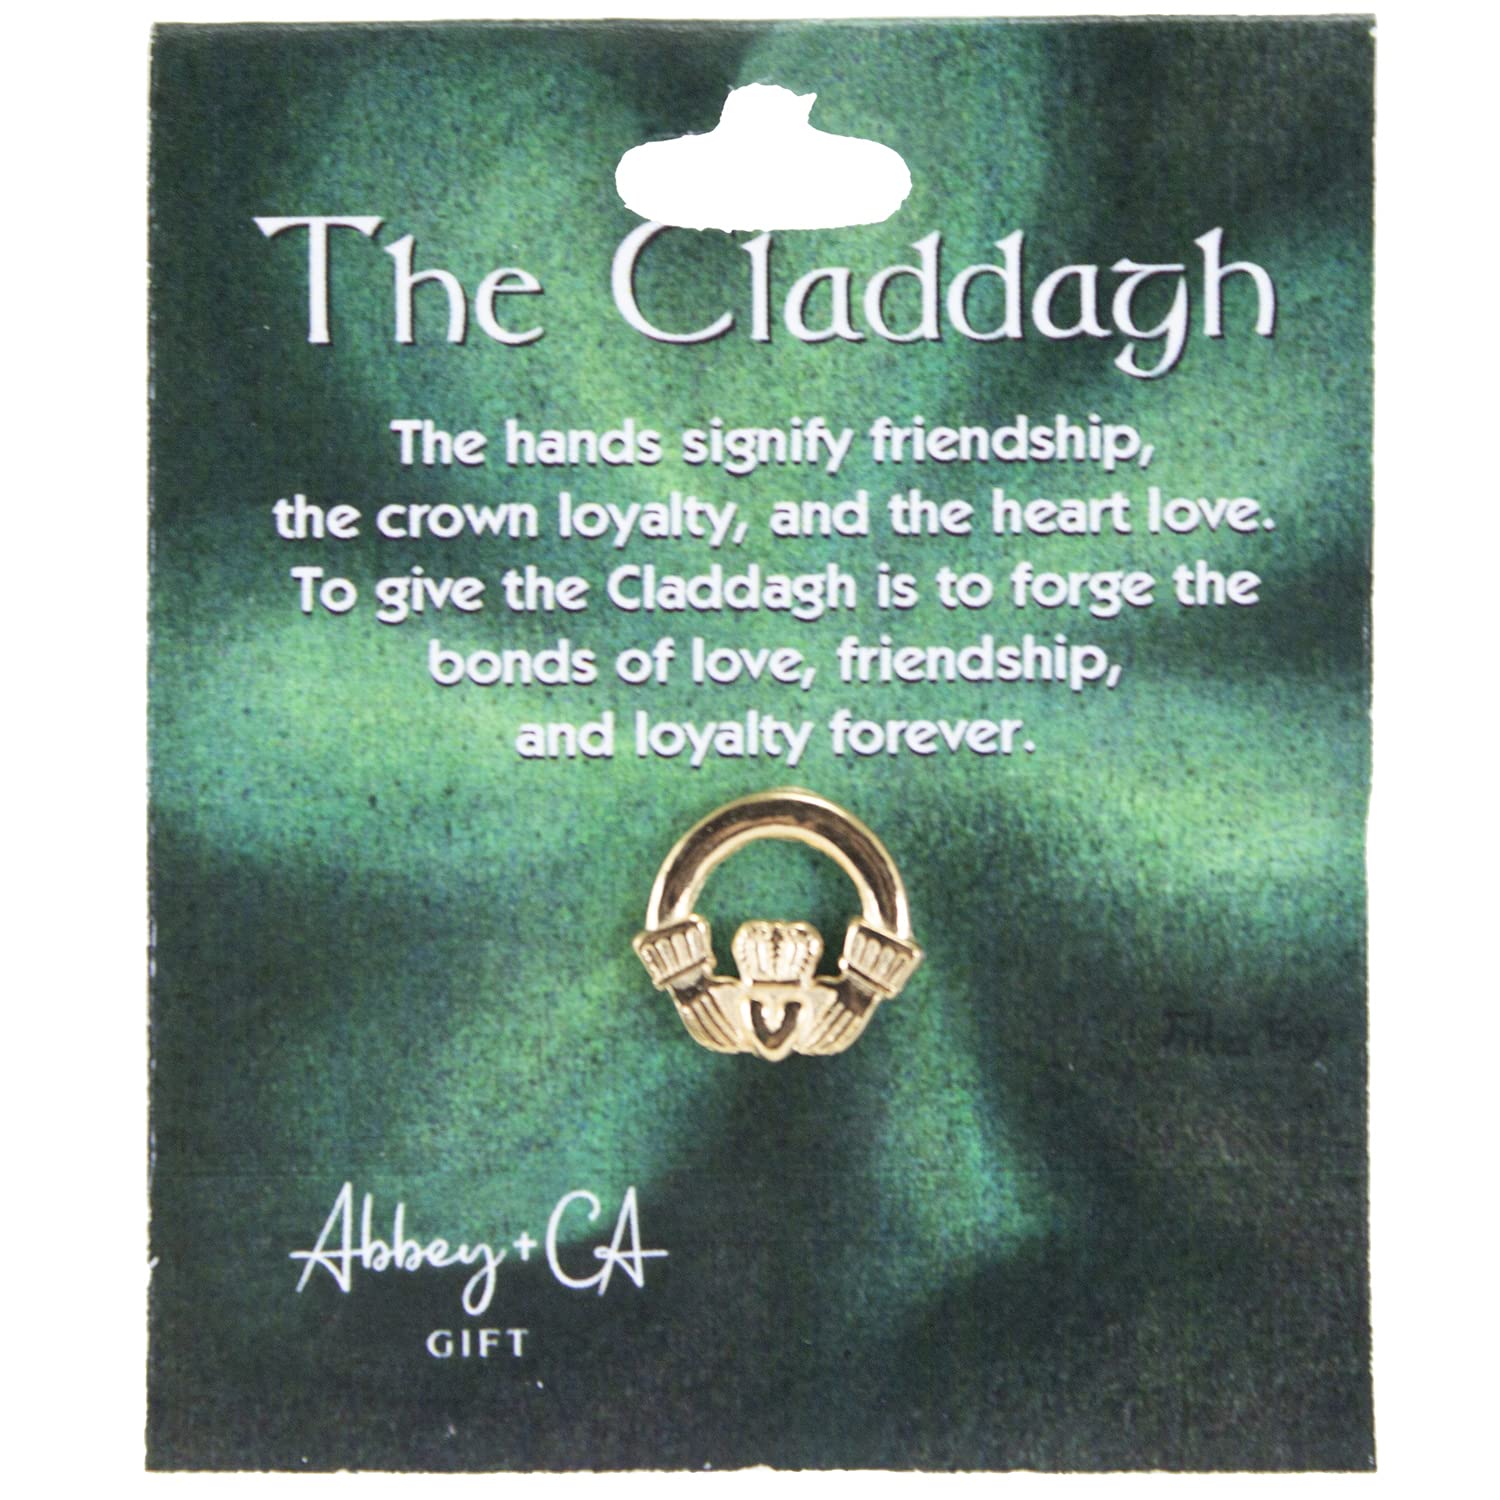 Cathedral Art unisex adult Cathedral Art Abbey CA Gift Claddagh Lapel Pin Carded, Gold, One Size US